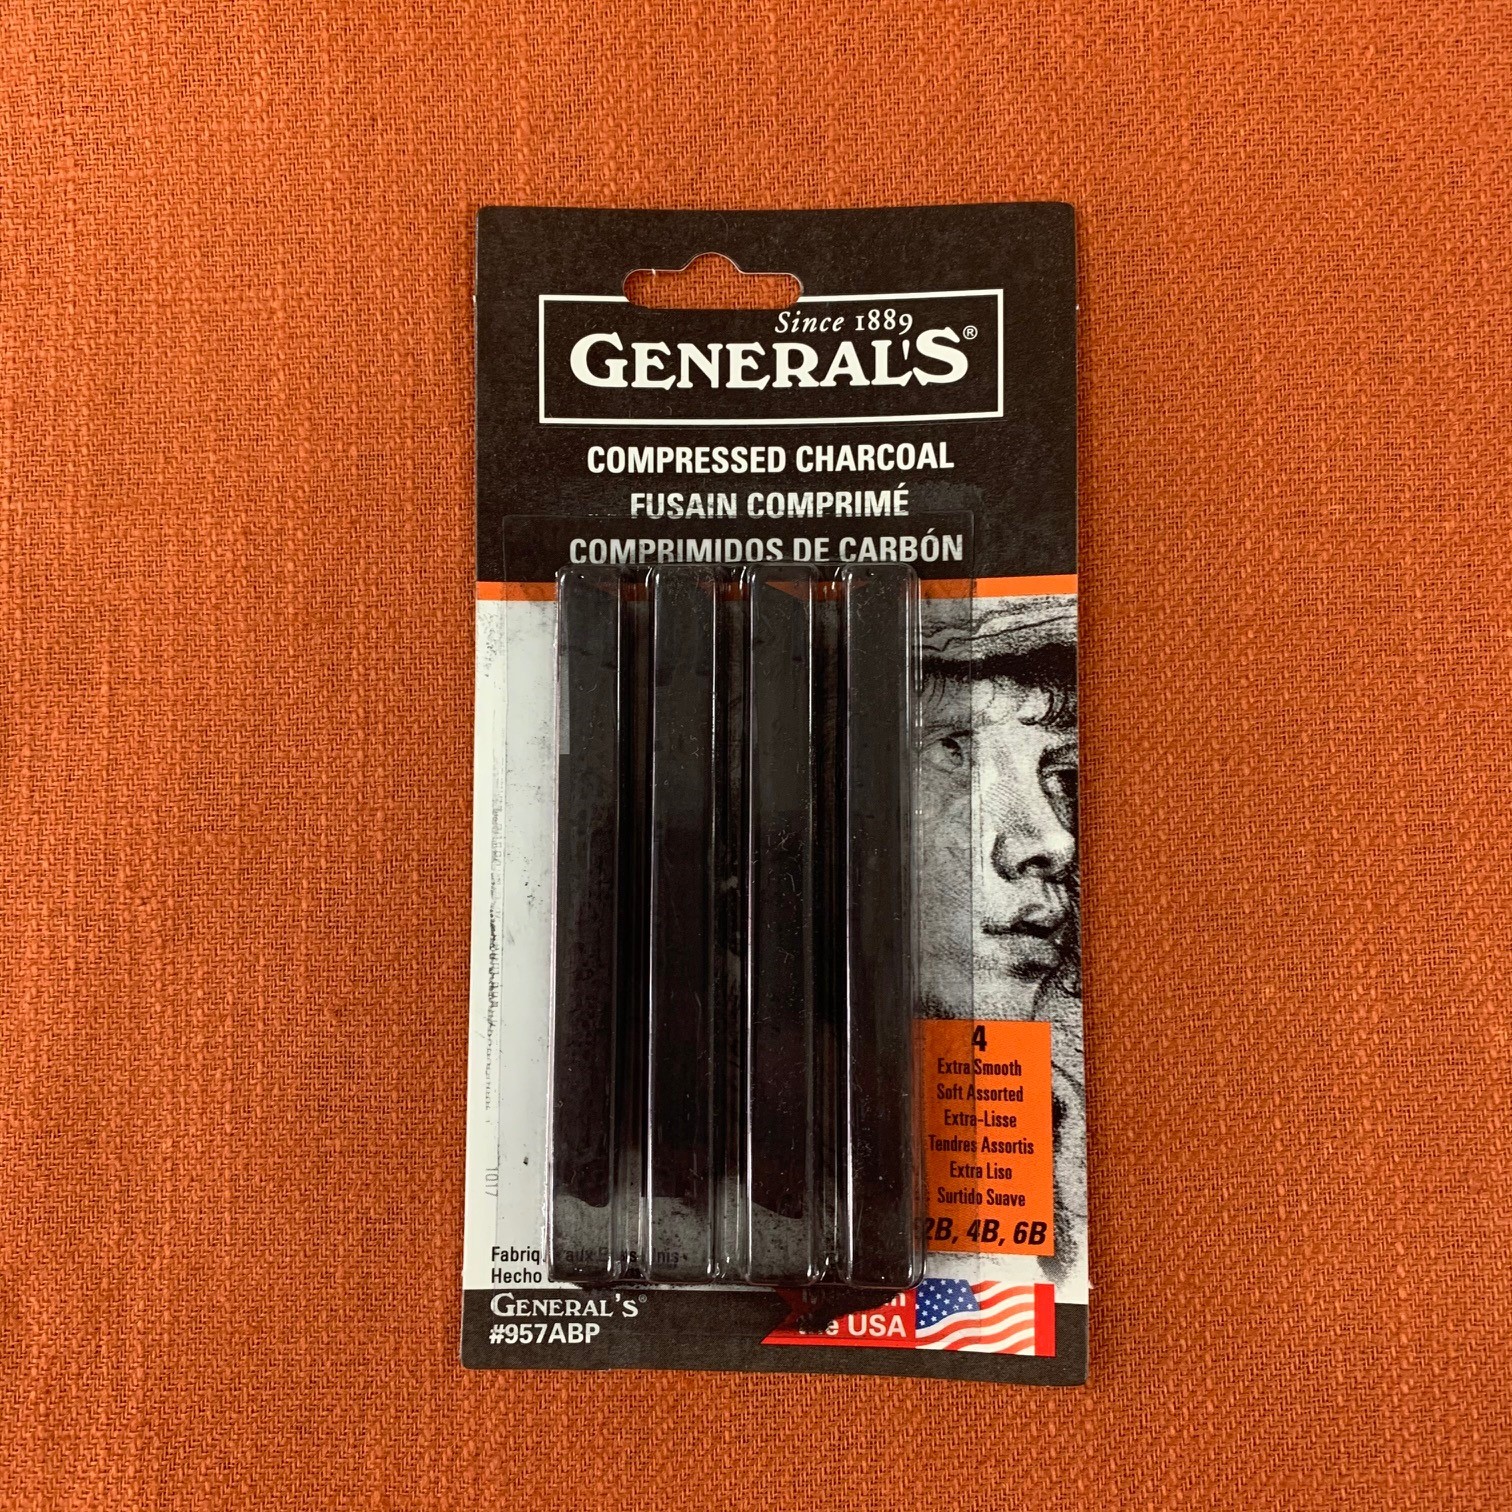 General's Getting Started with Charcoal Set